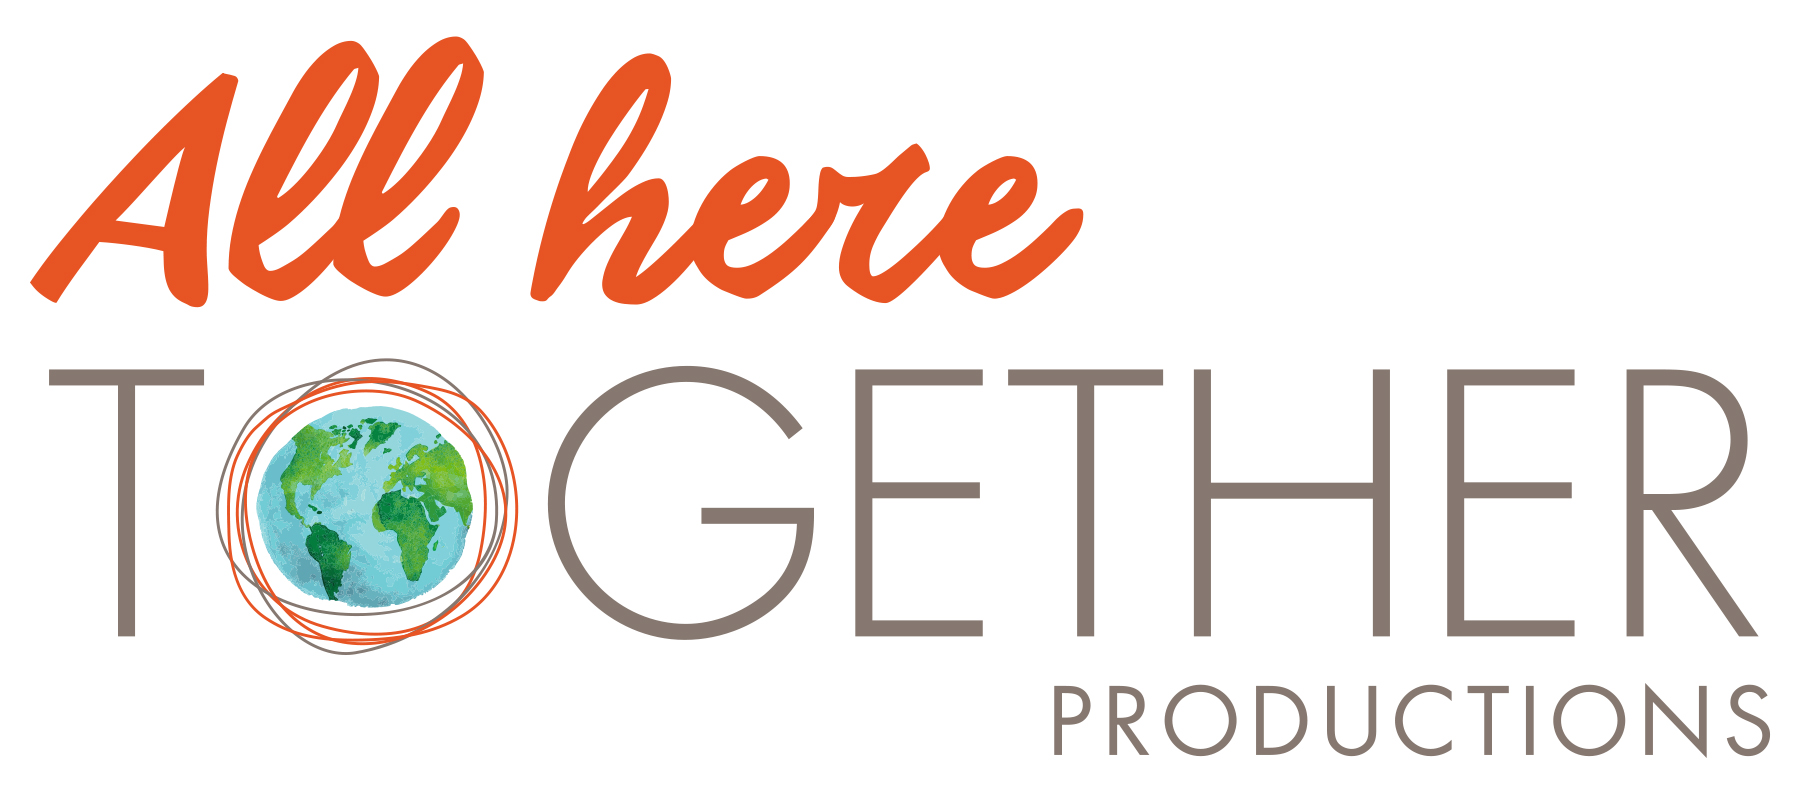 All Here Together Productions logo